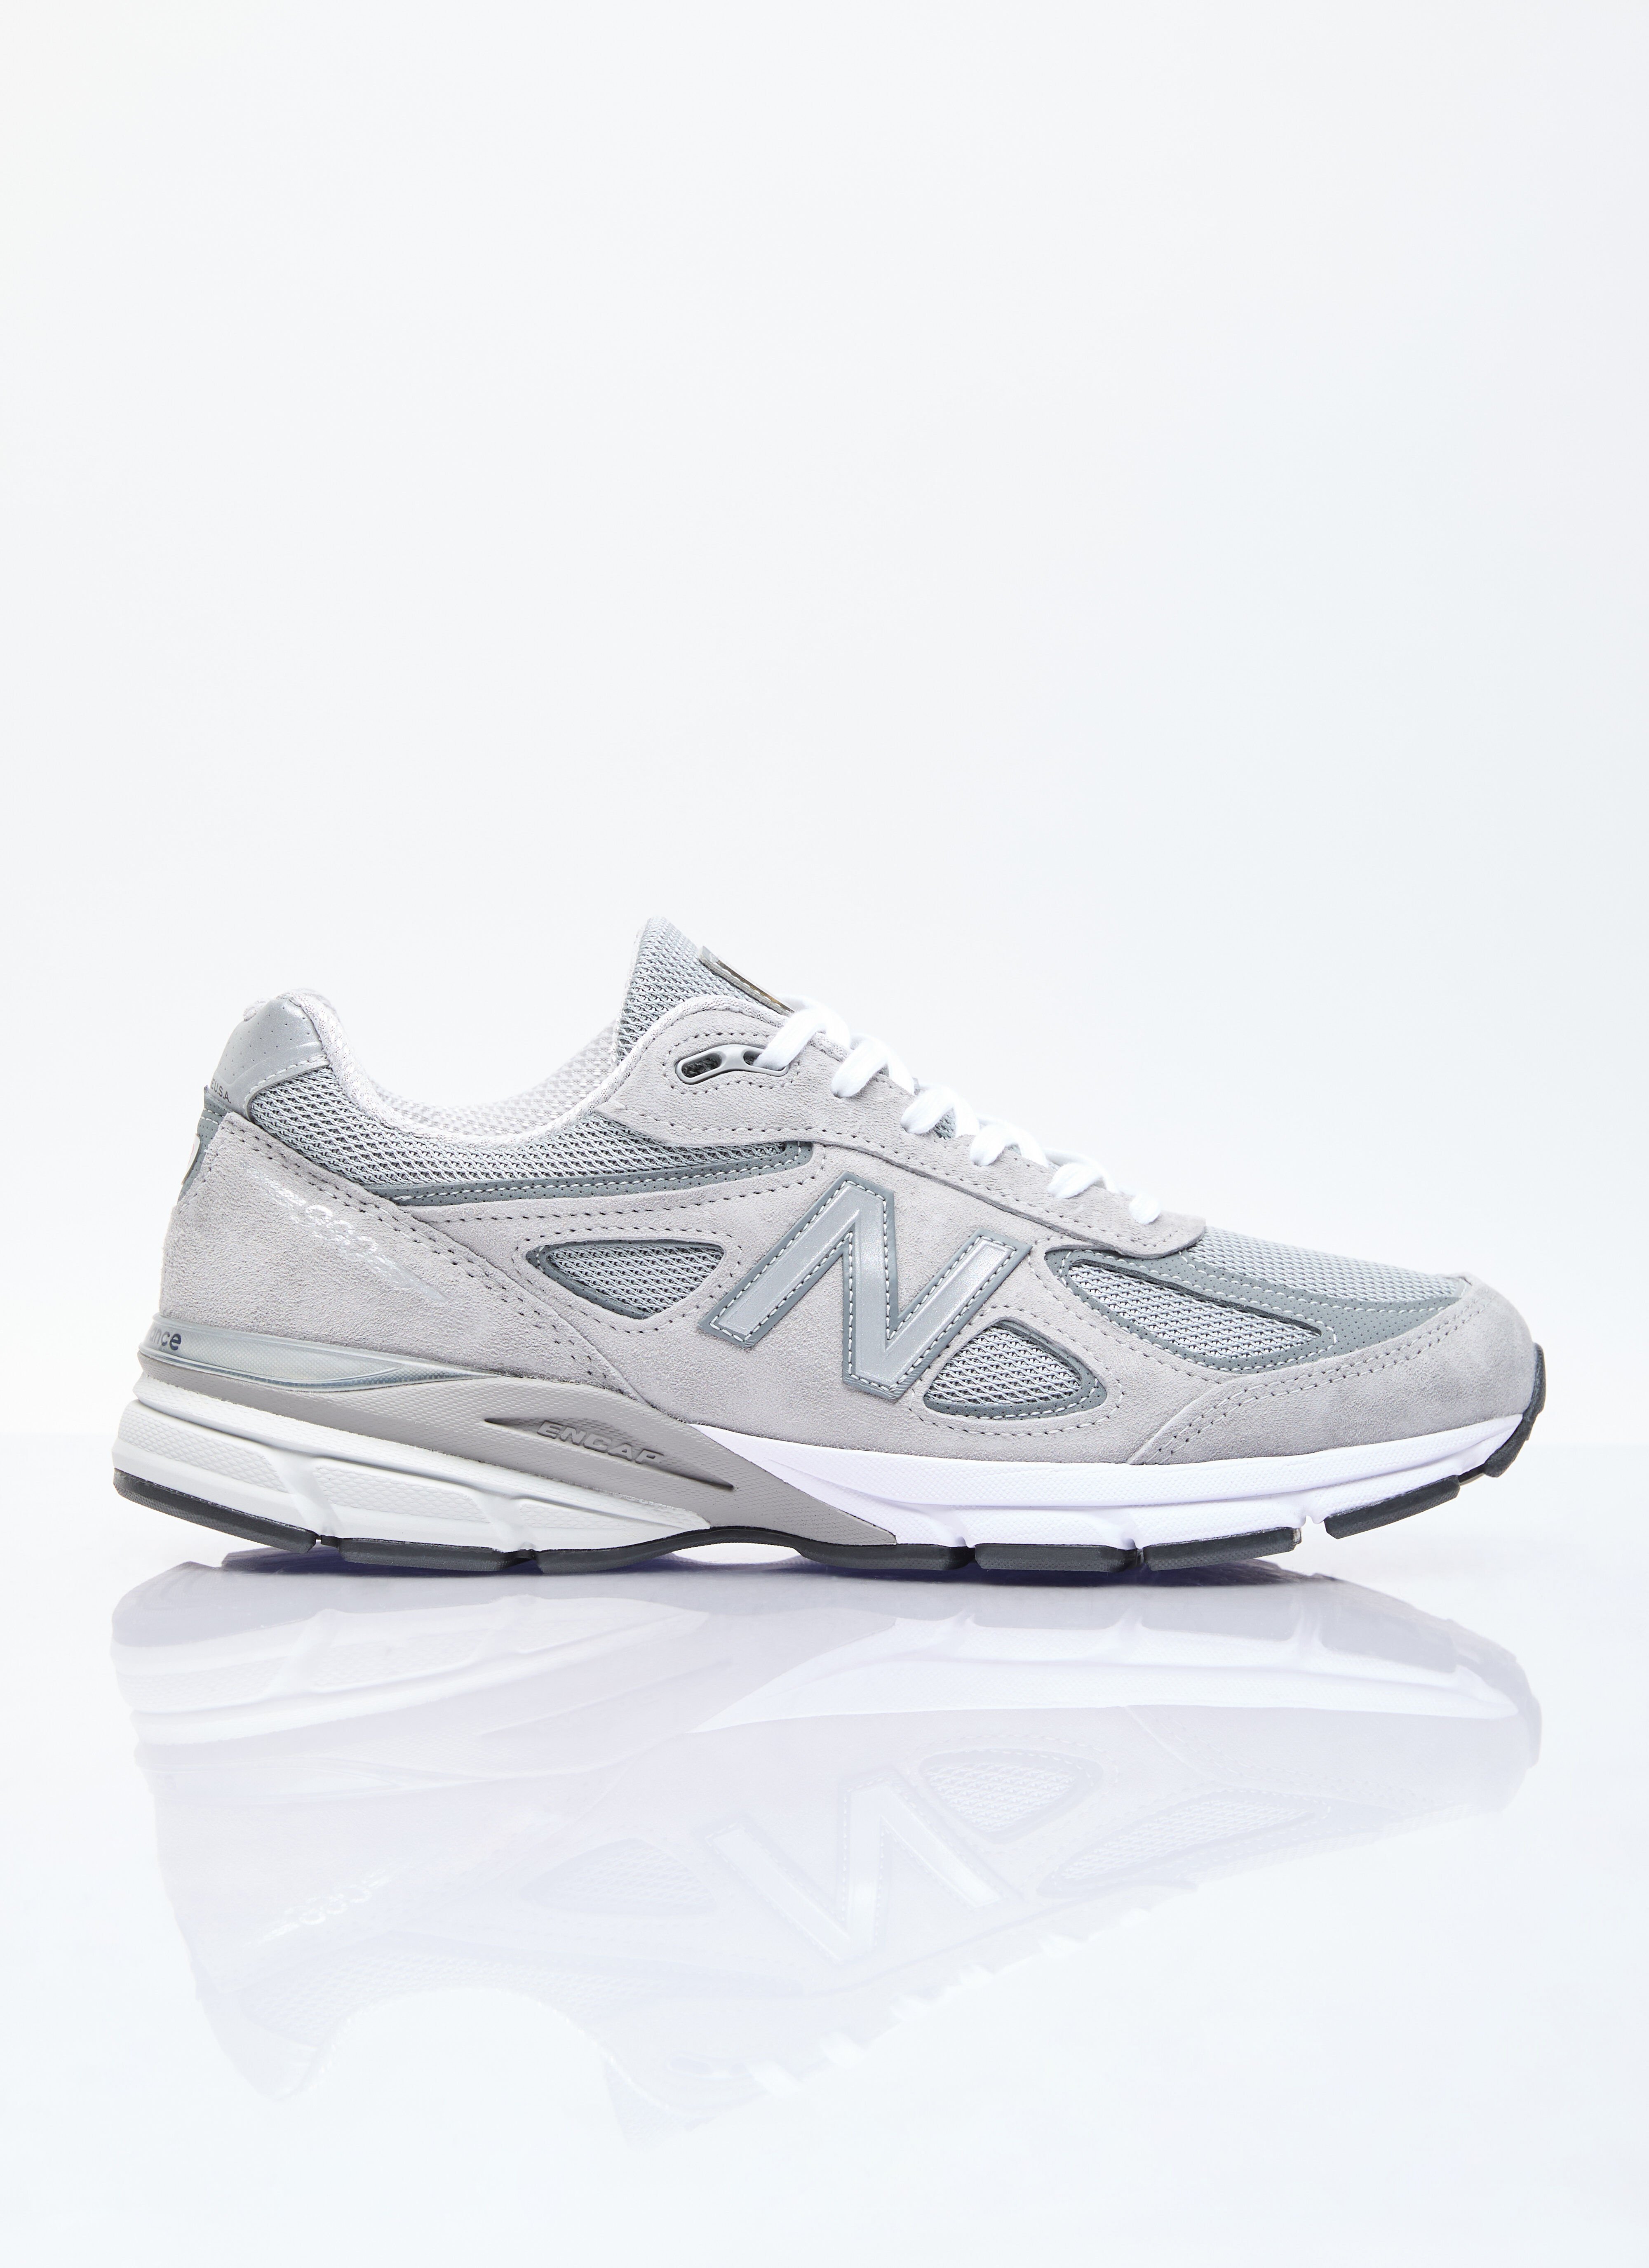 New Balance 990v4 Sneakers Grey new0254004